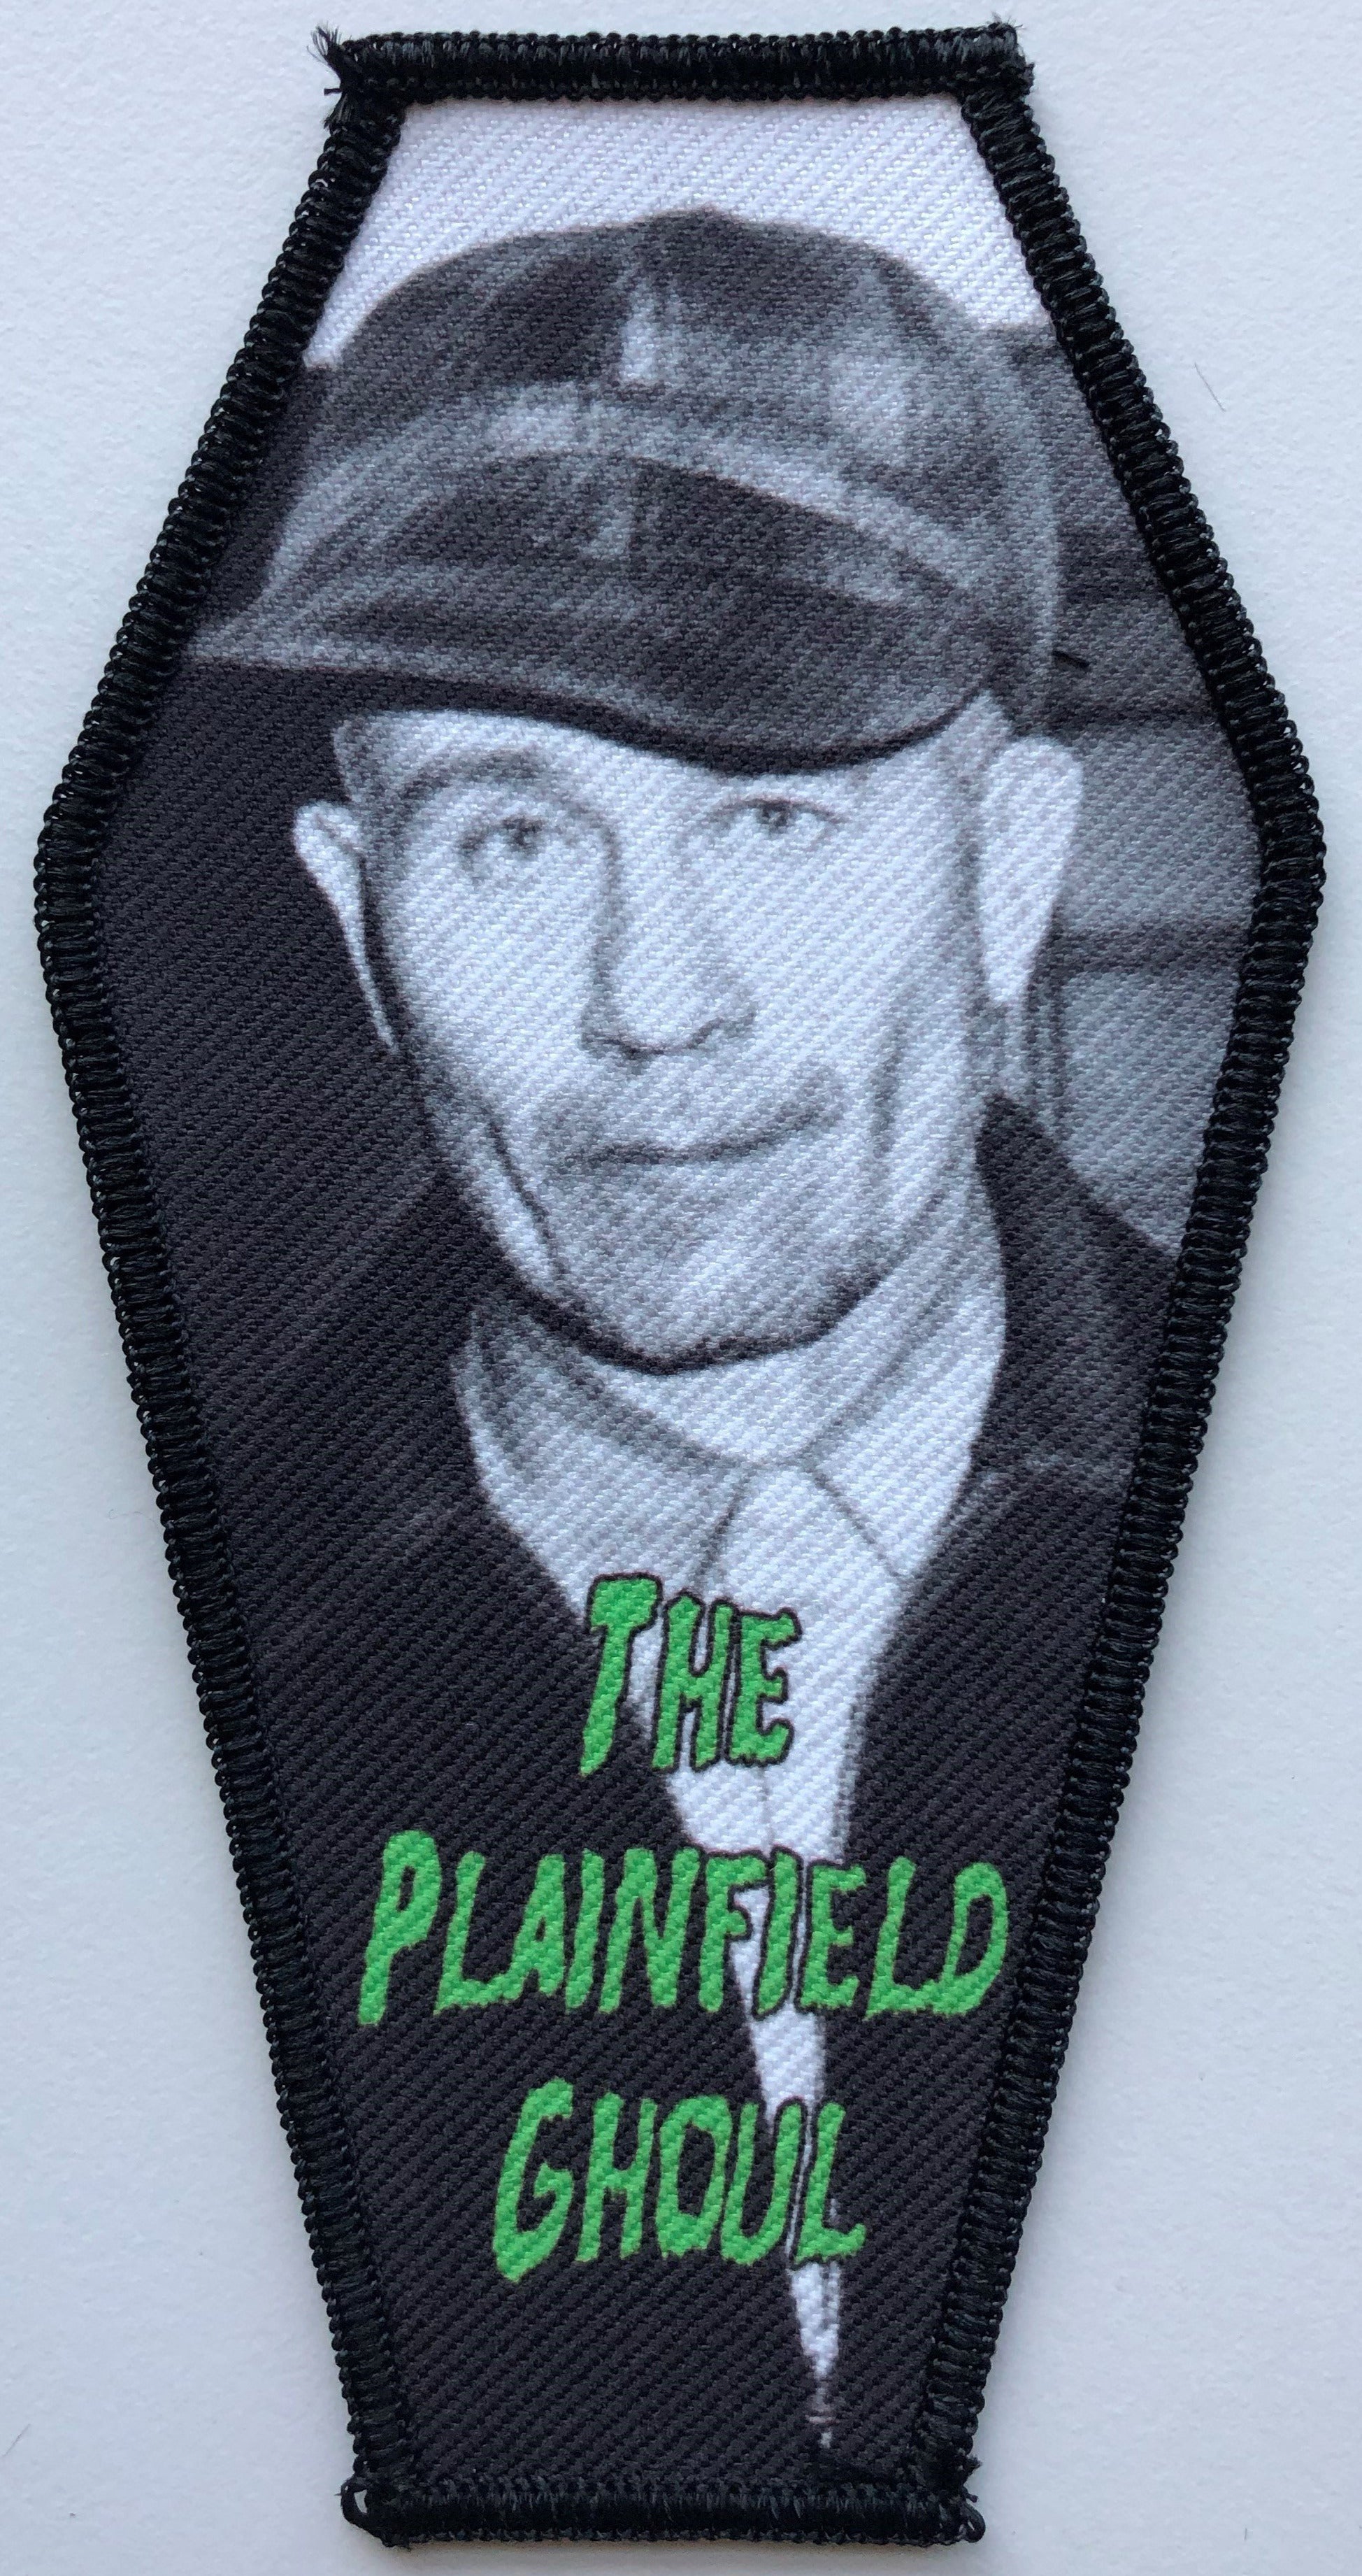 Ed Gein Small Coffin Patch